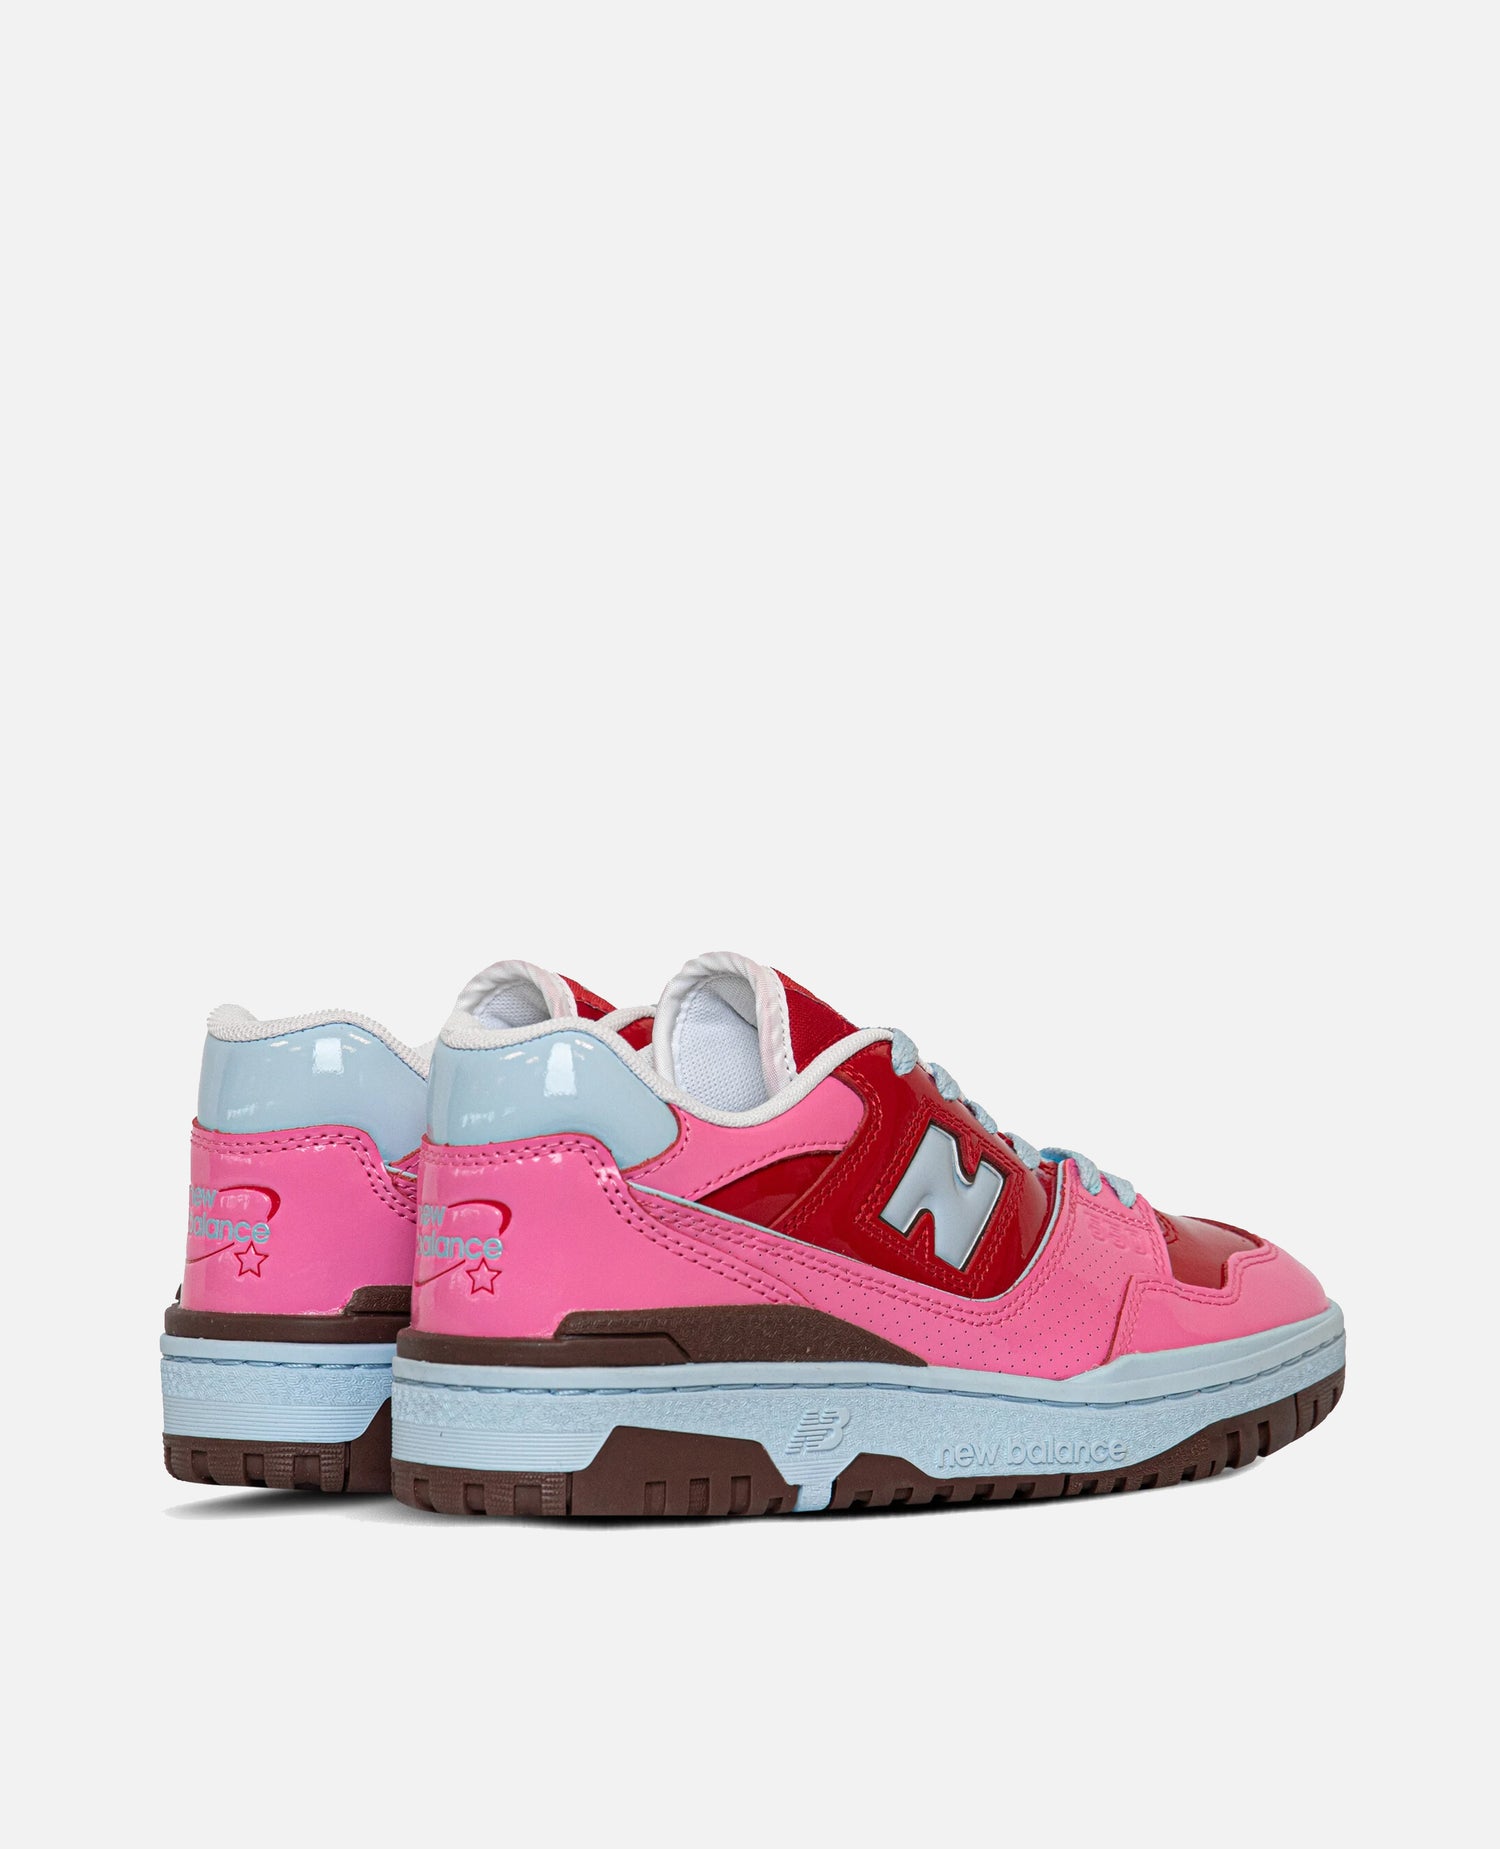 New Balance 550 (Red/Pink/Brown)